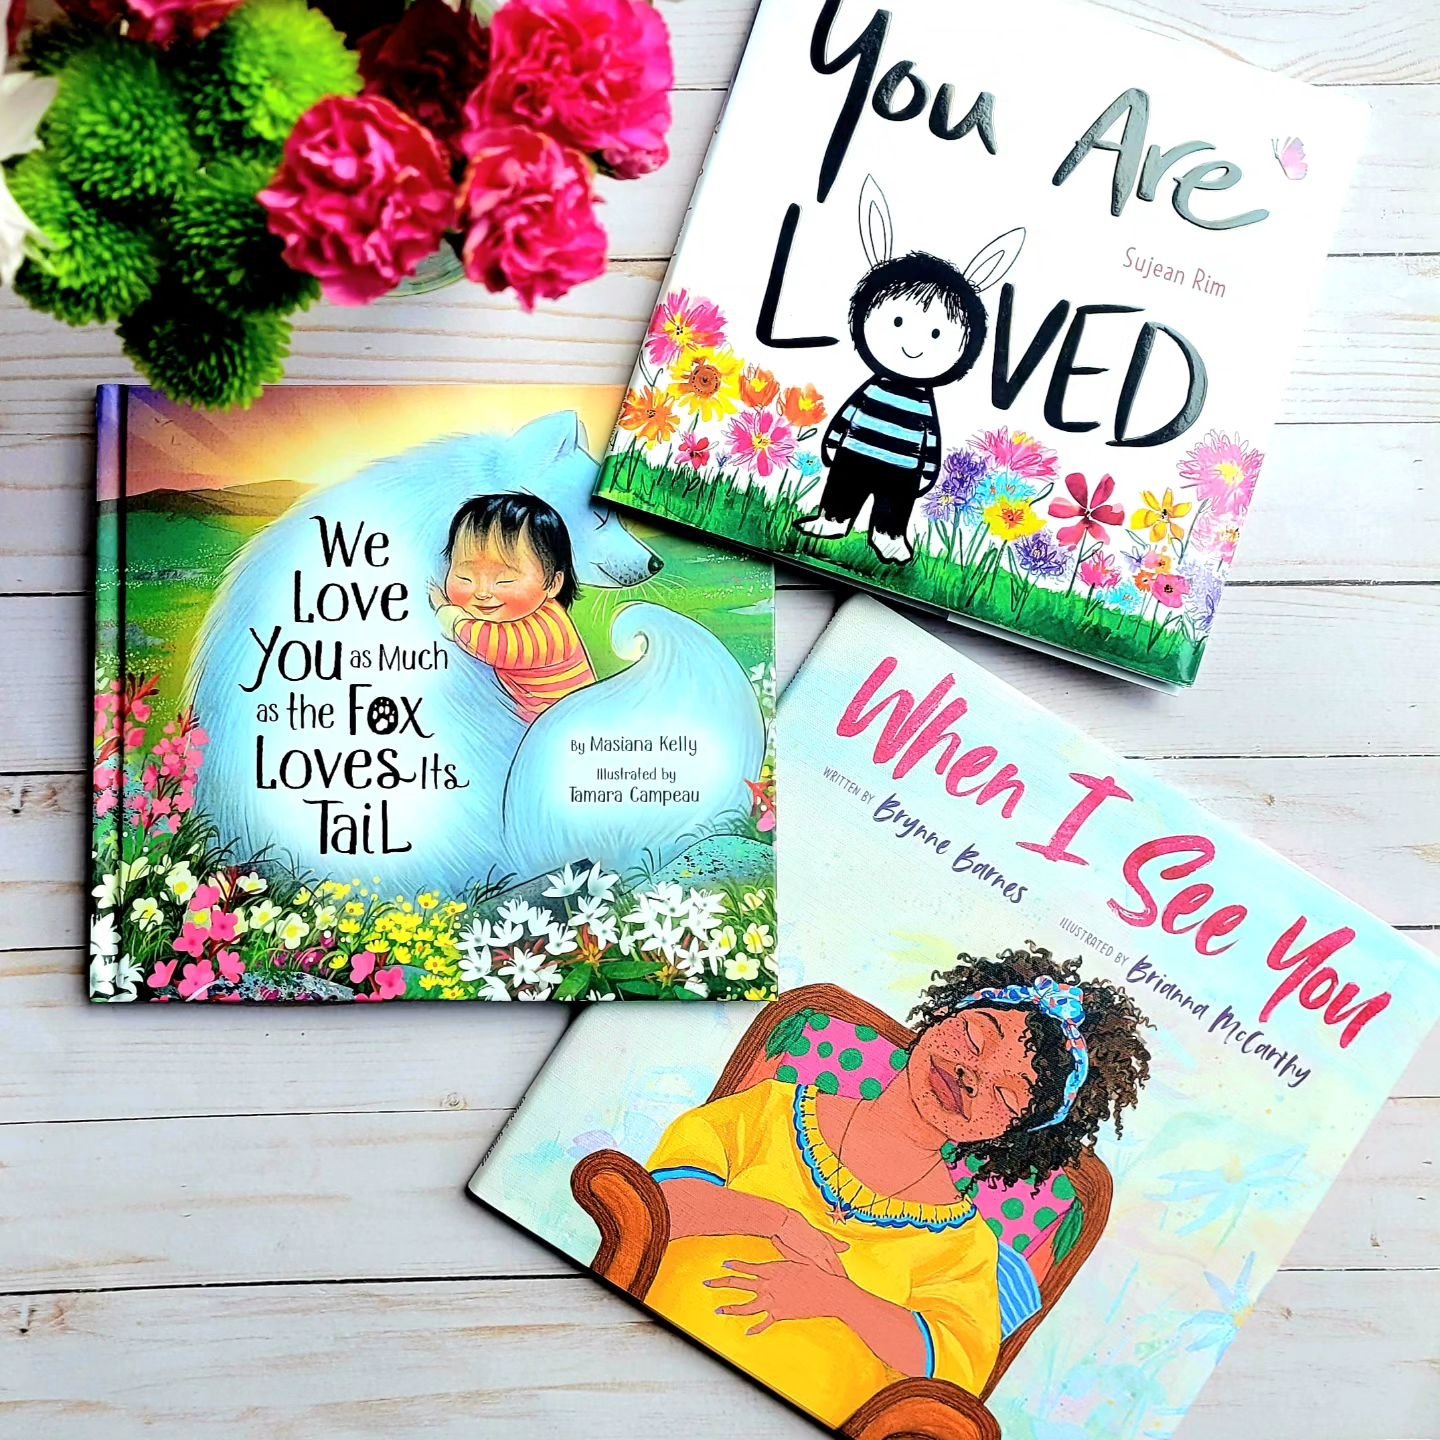 💕Mother's Day is less than a week away! Today's book share is a sweet trio of new-release picture books perfect for sharing this upcoming special day. ❤️Happy reading!

💕You Are Loved @simonkids @sujeanbooks

One of my favorite new reads and can co